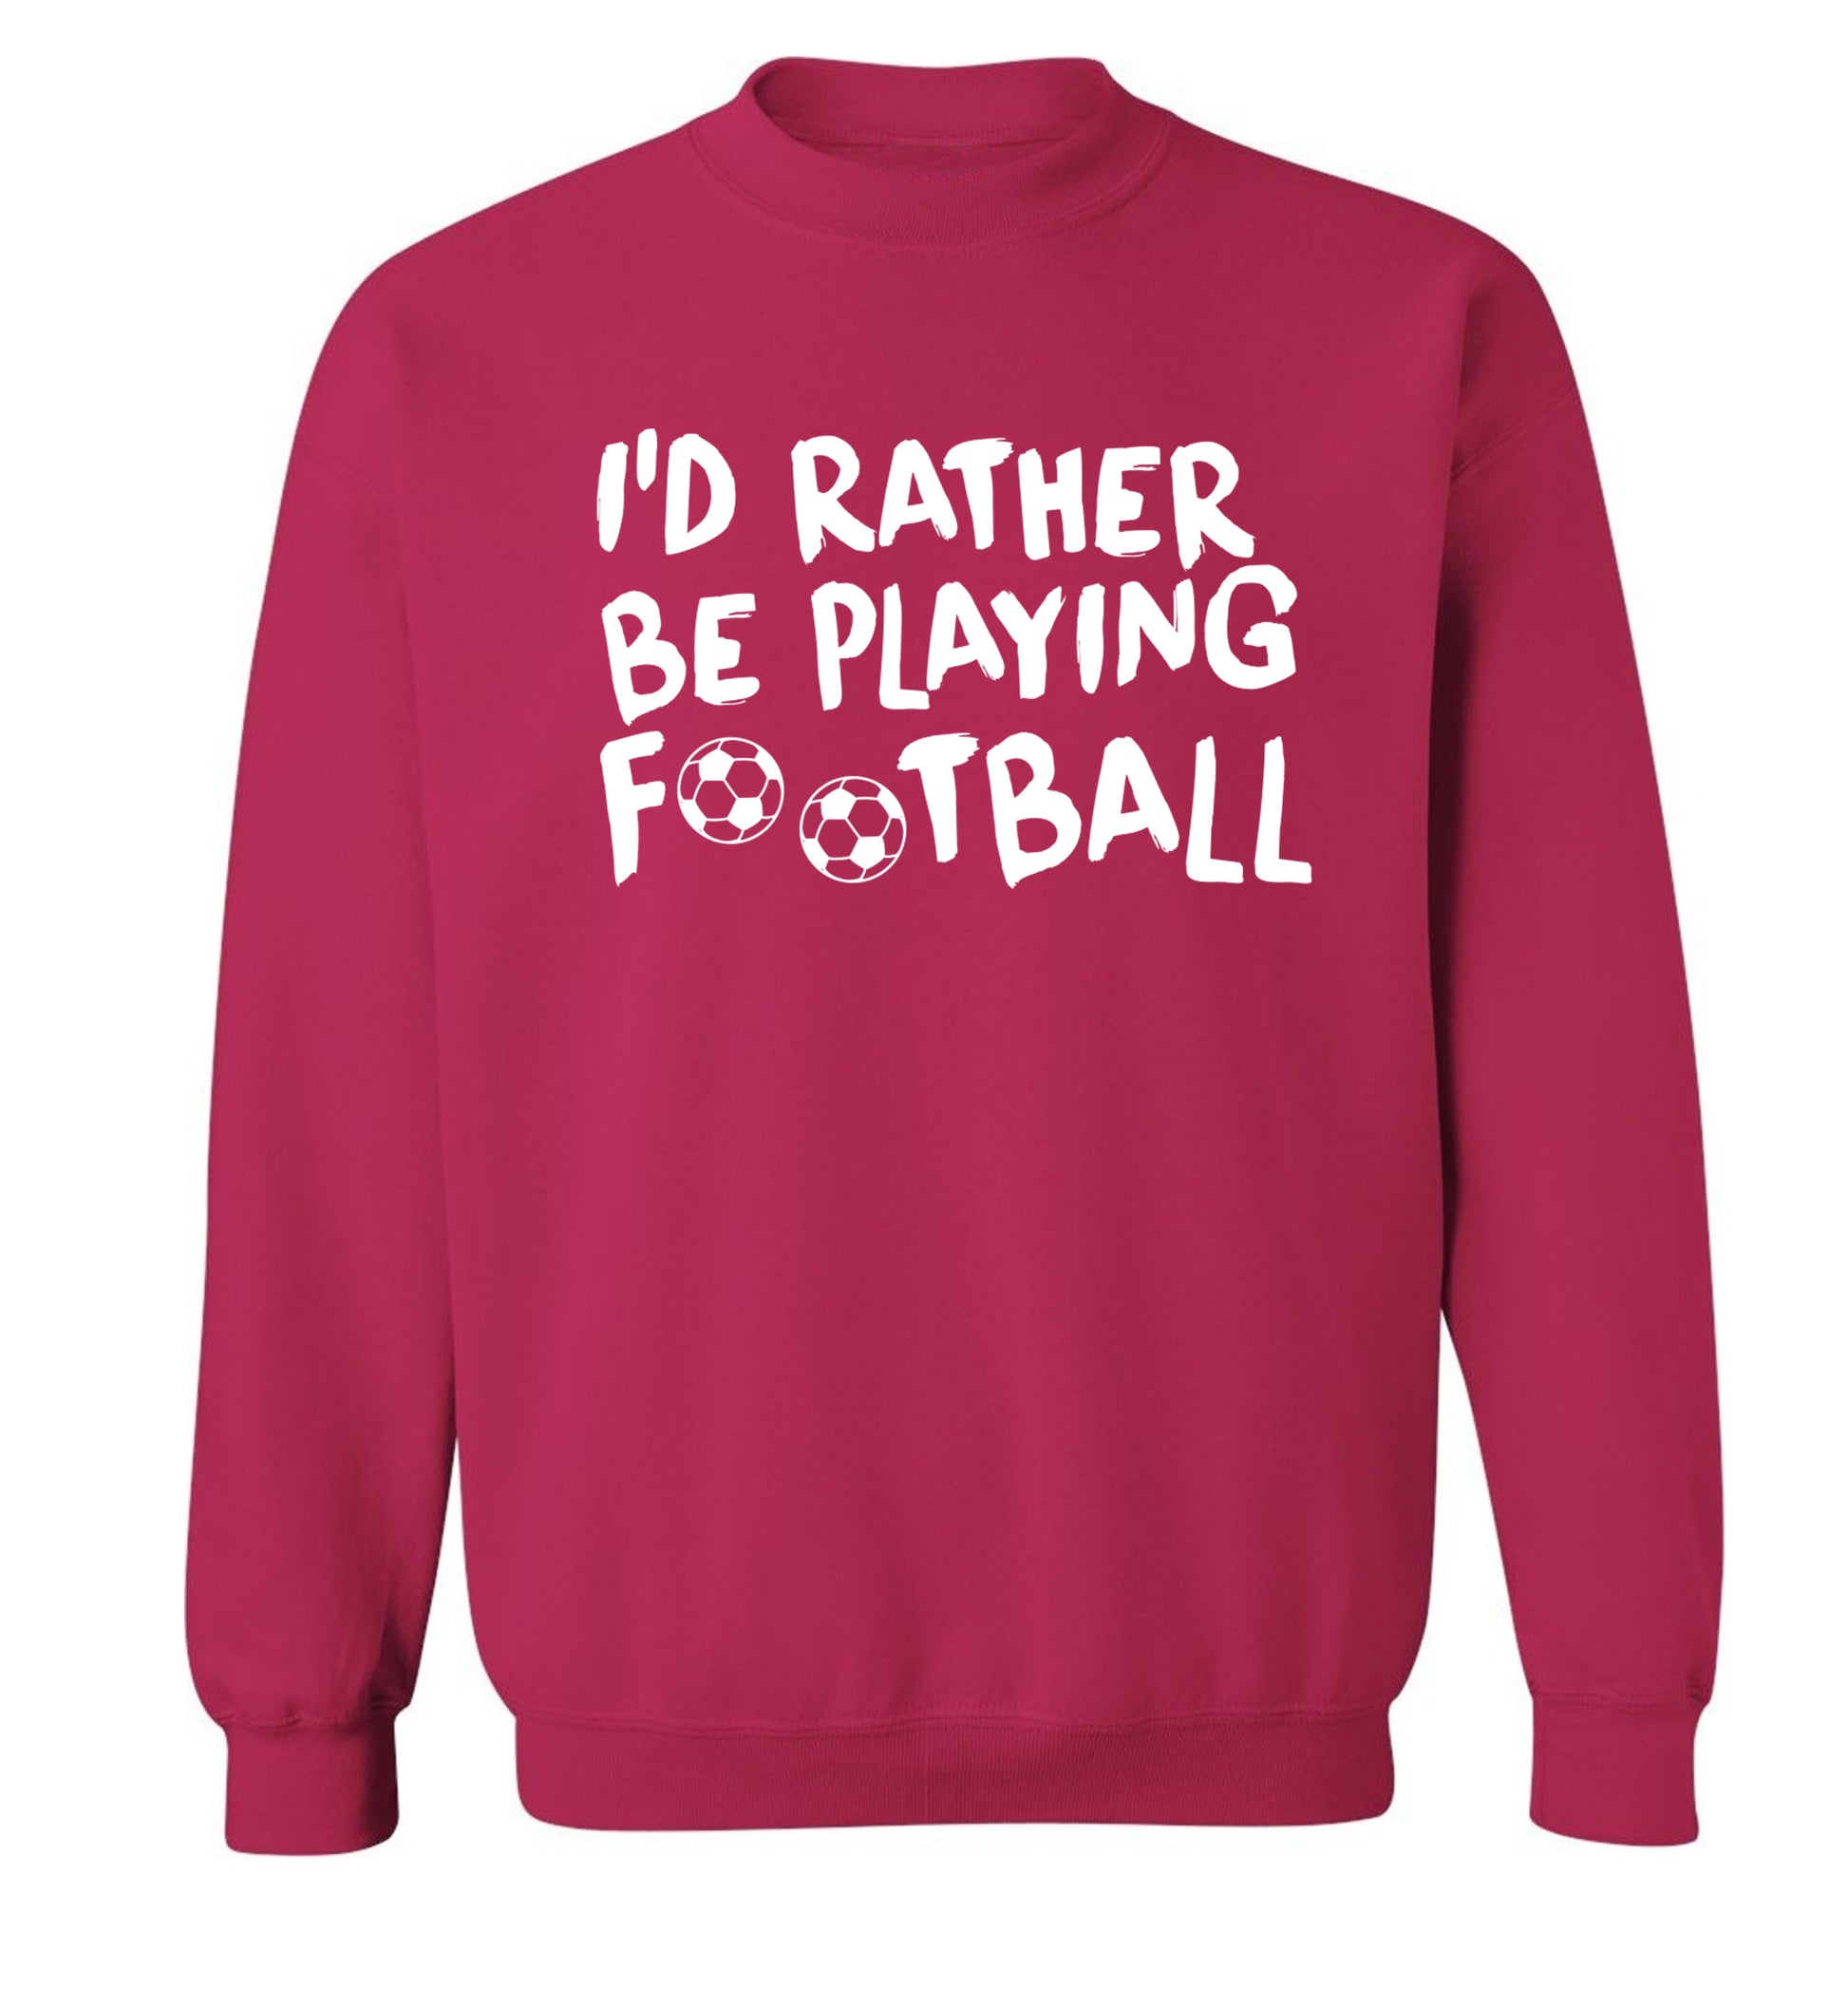 I'd rather be playing football Adult's unisexpink Sweater 2XL